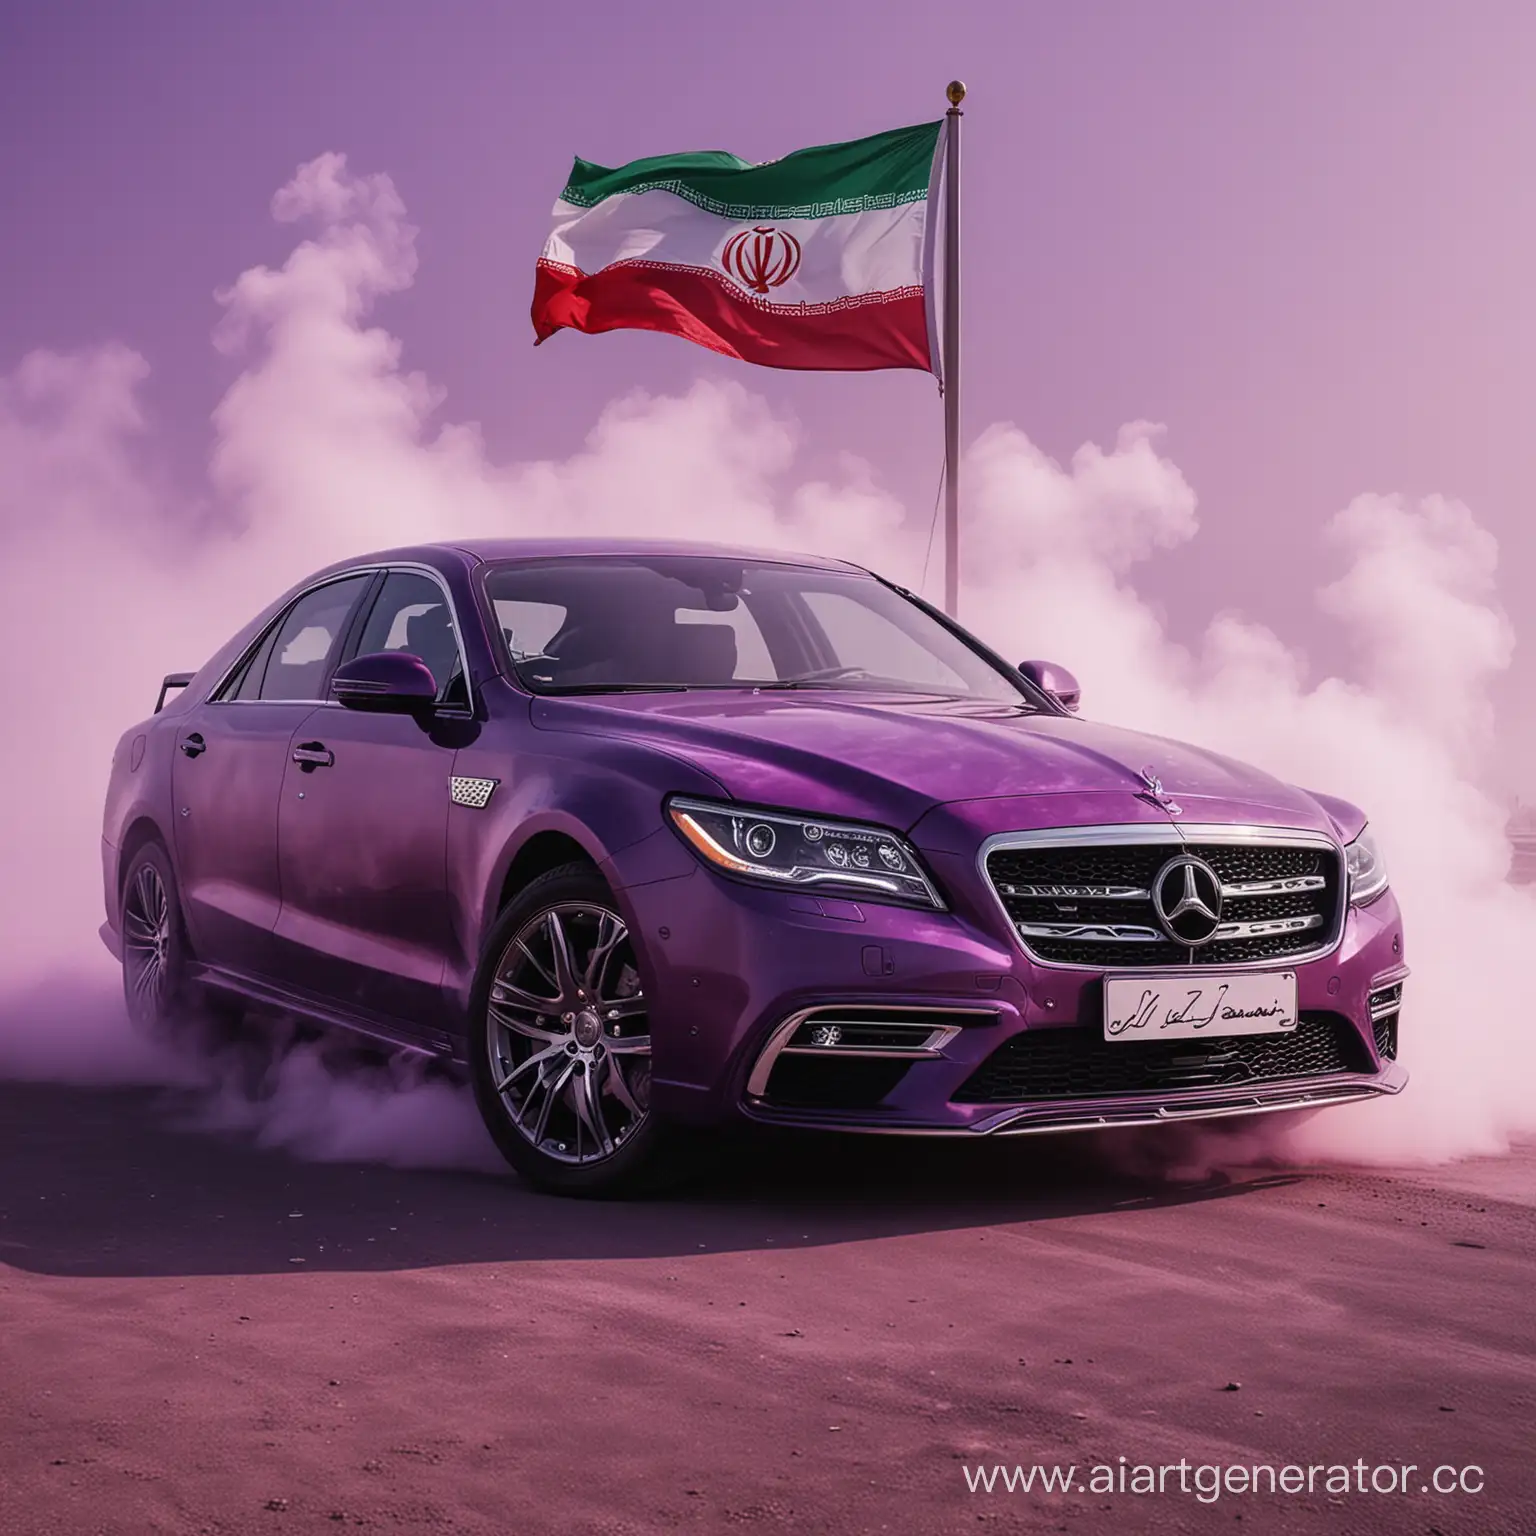 Purple-Luxury-Car-Surrounded-by-Purple-Fog-with-Irans-Flag